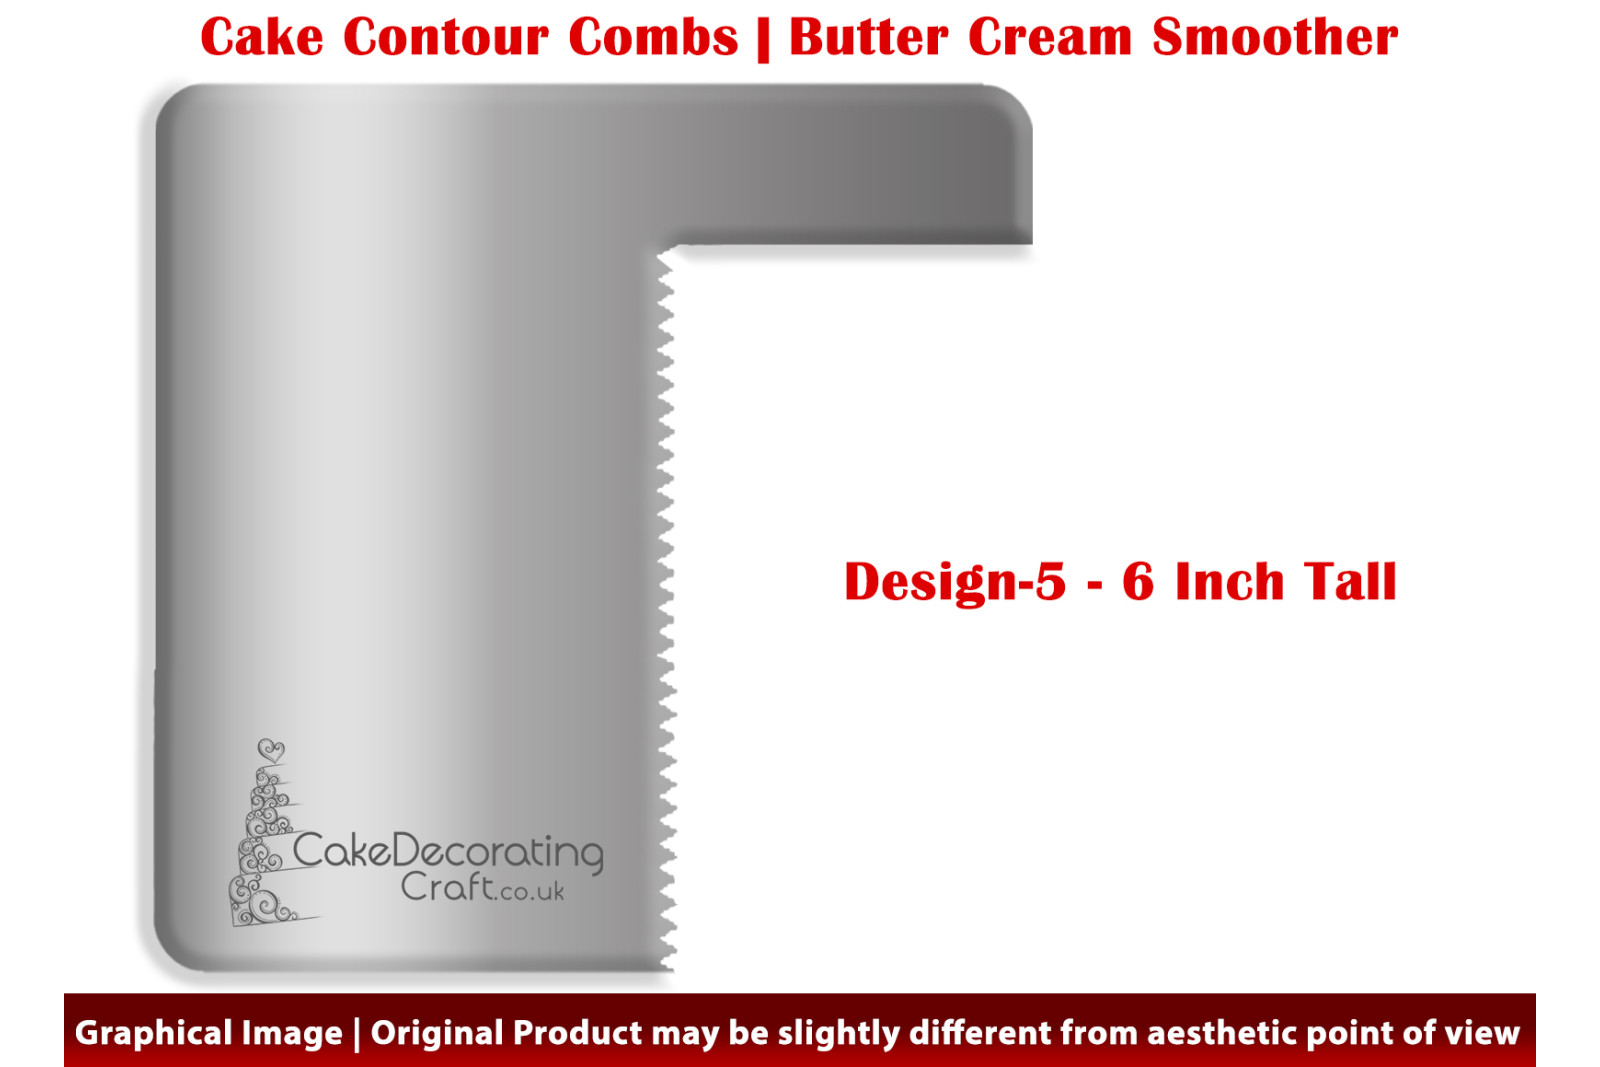 Zig Zag | Design 5 | 6 Inch | Cake Decorating Craft | Cake Contour Combs | Smoothing | Metal Spreader | Butter Cream Smoothing | Genius Tool